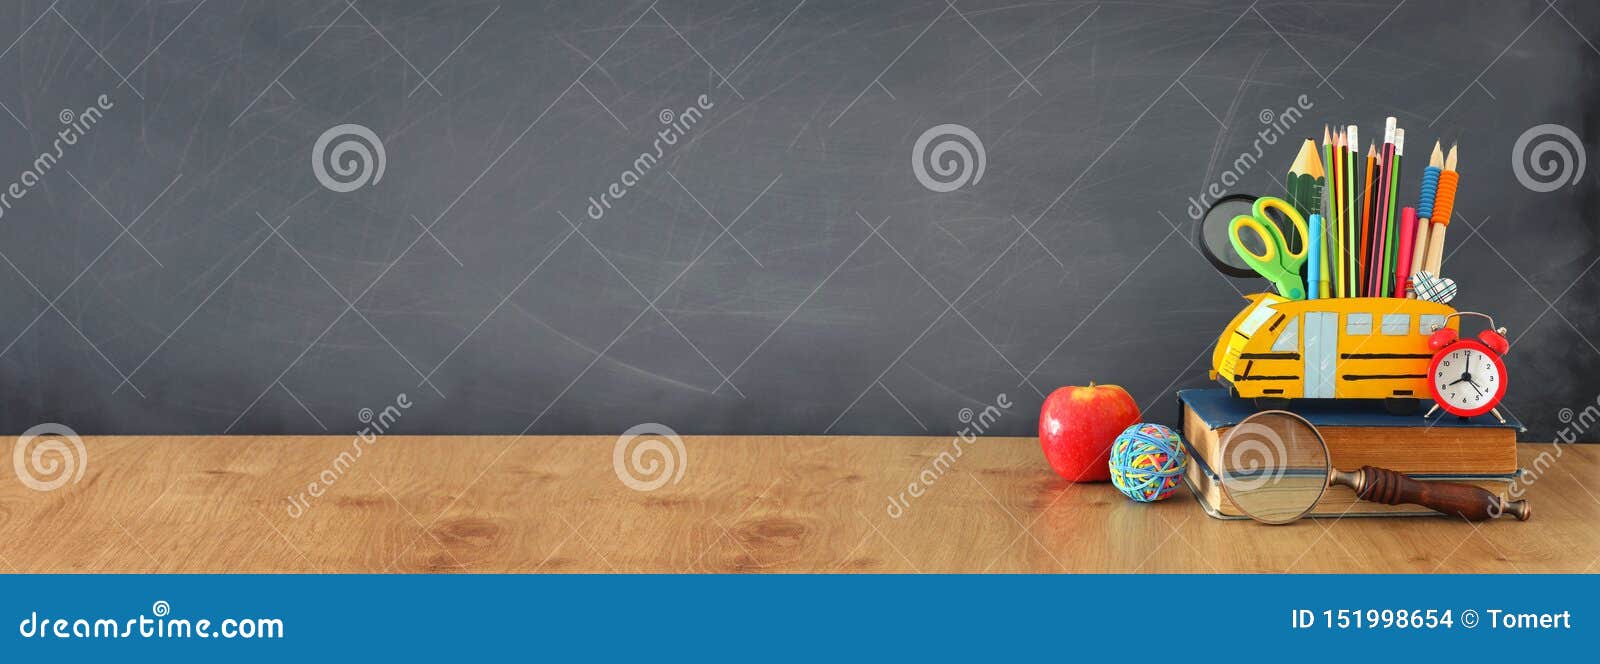 education and back to school concept. pencils stand as bus over wooden desk infront of classroom blackboard